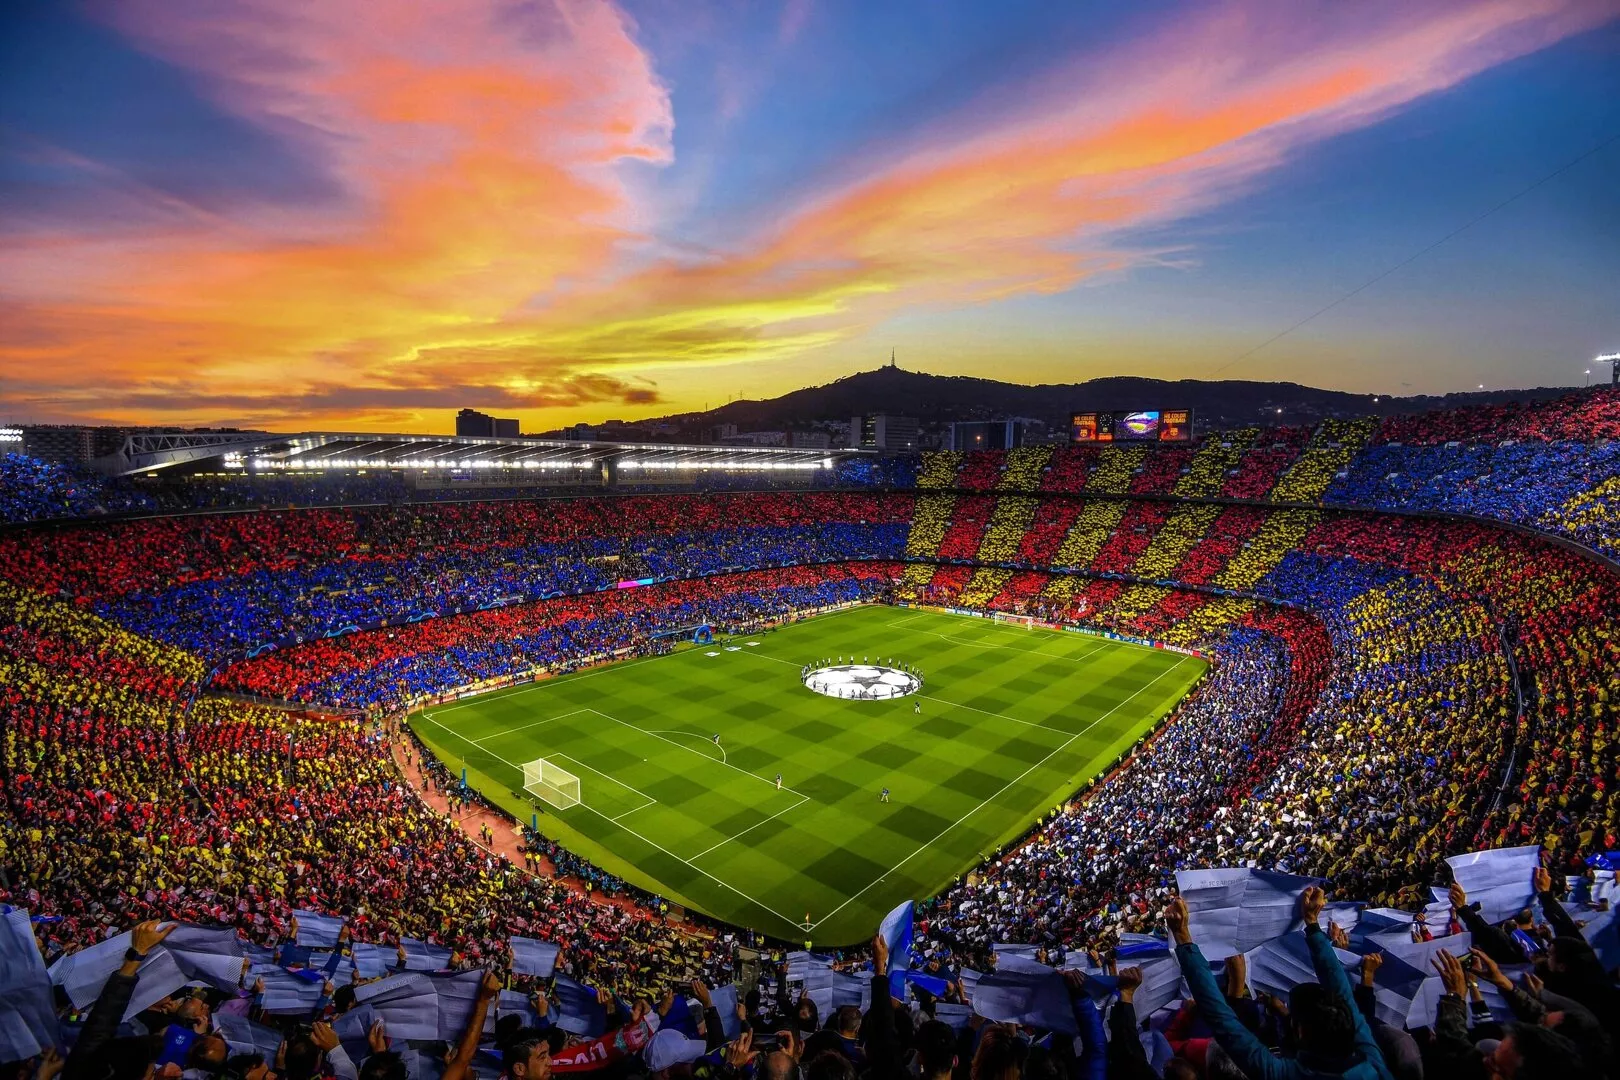 Barcelona set to play their last game at Camp Nou untill 2024-25 season